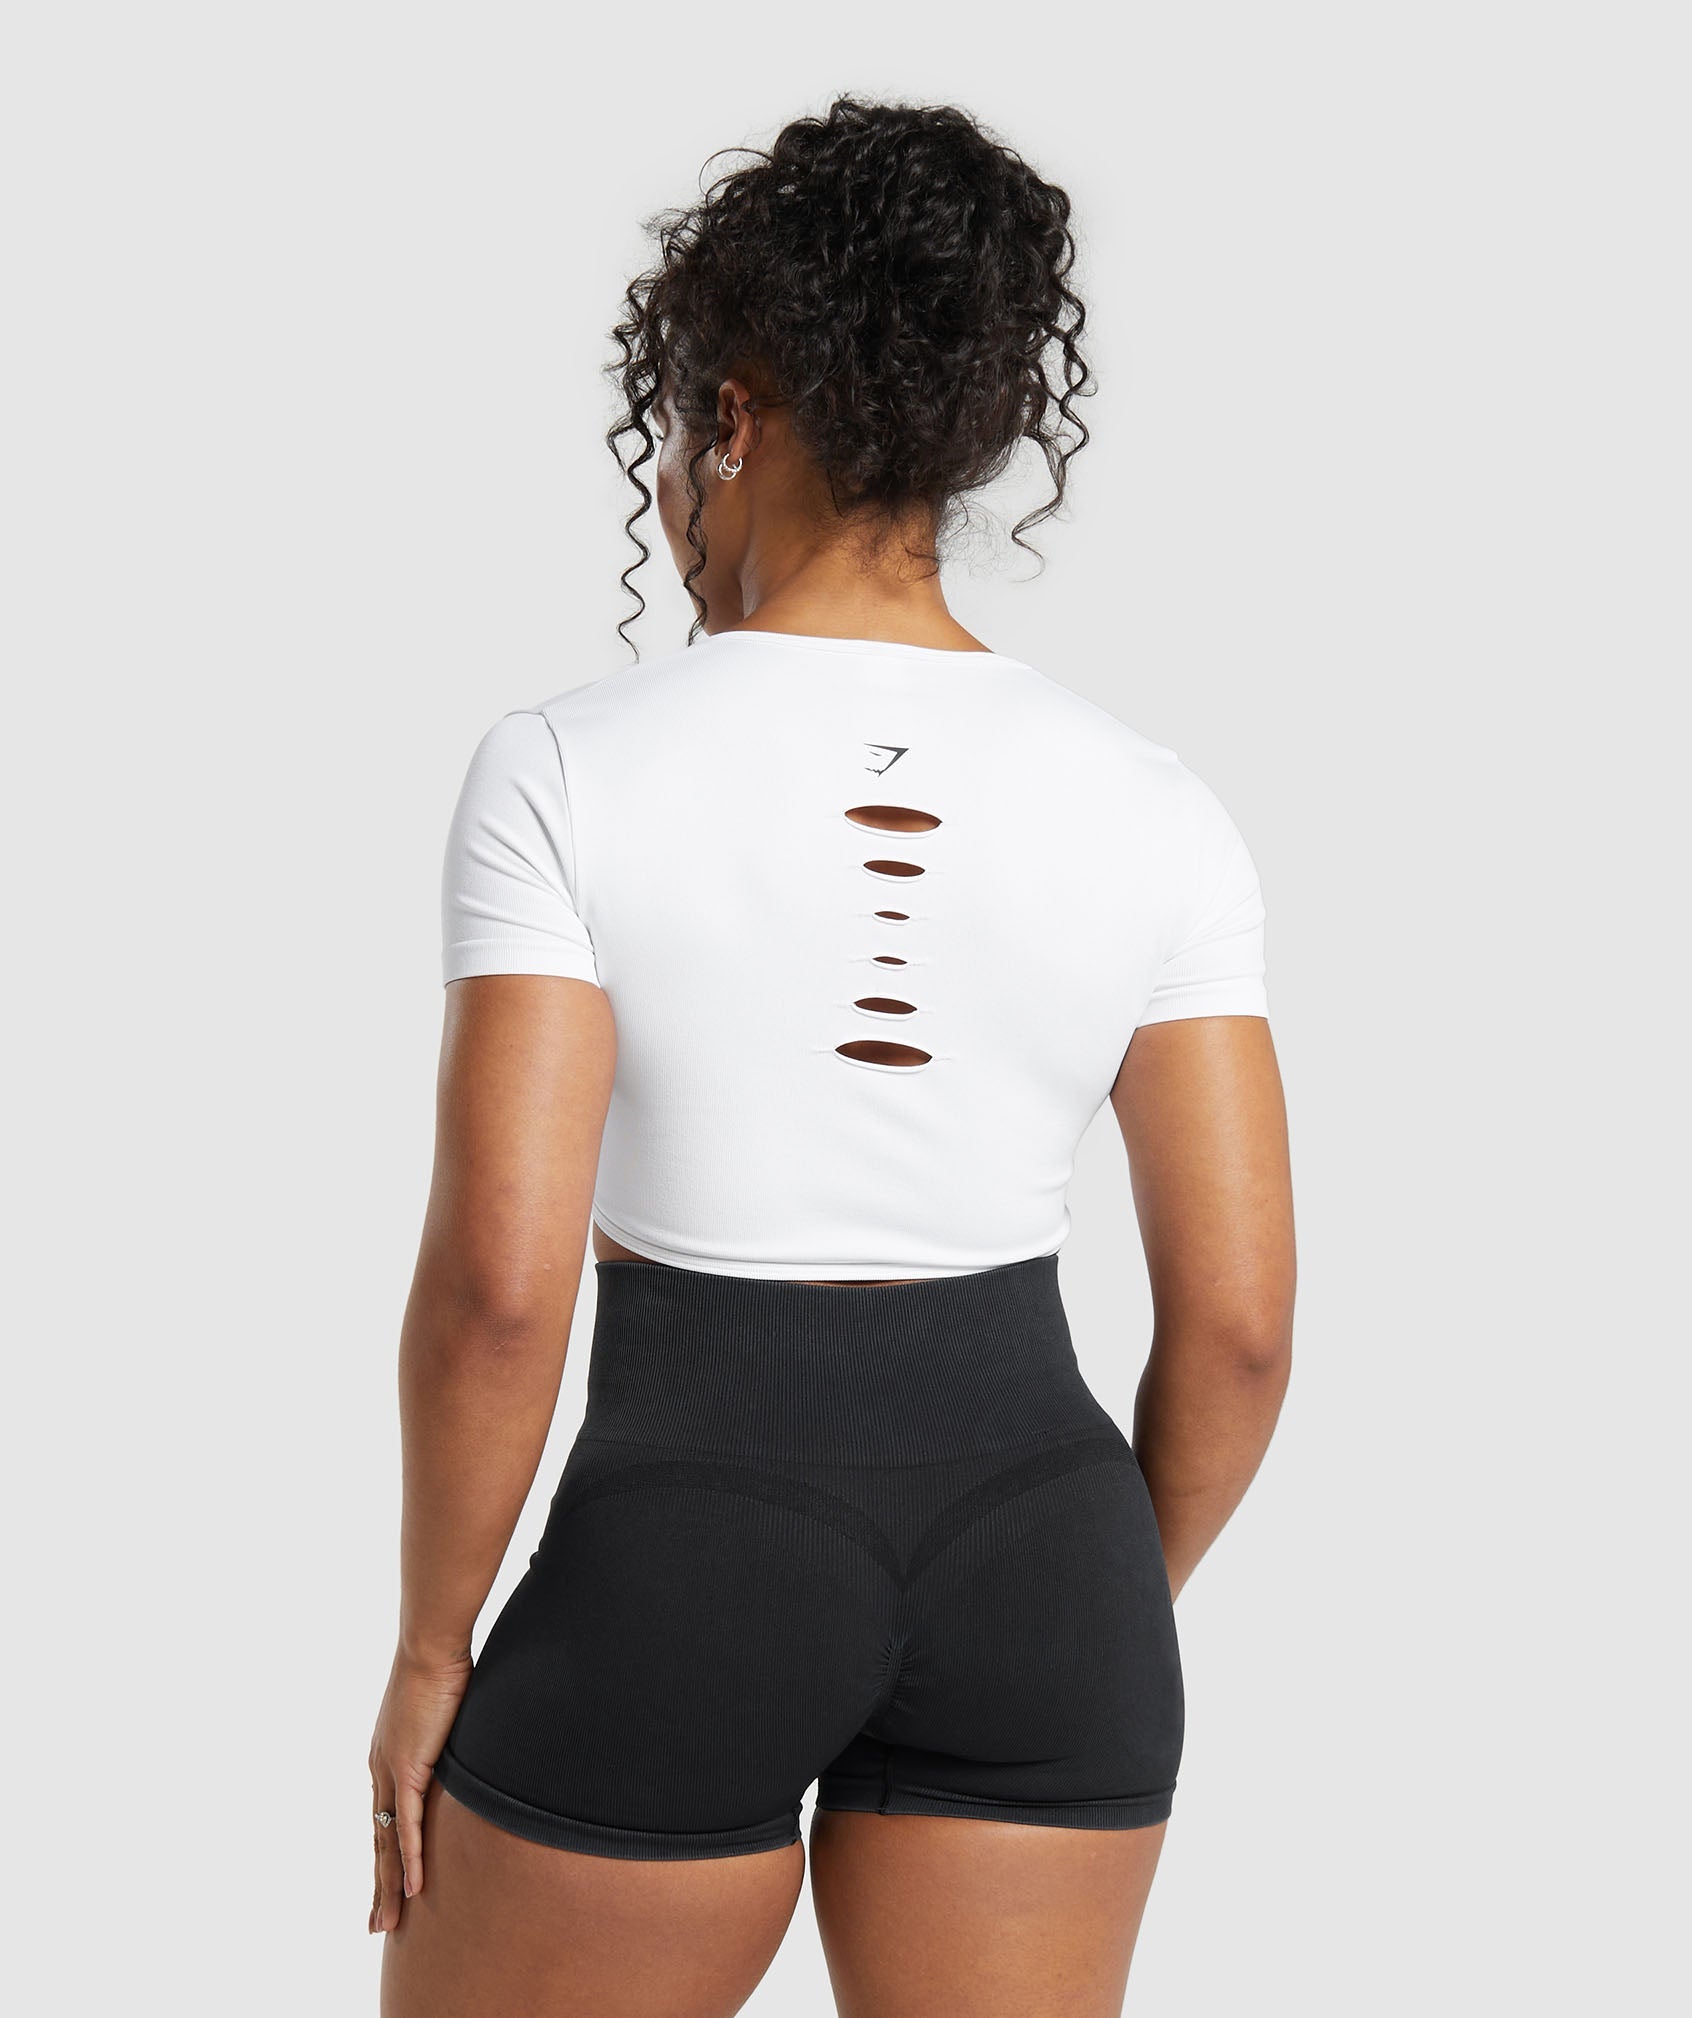 Gains Seamless Fitted Crop Top in White - view 2